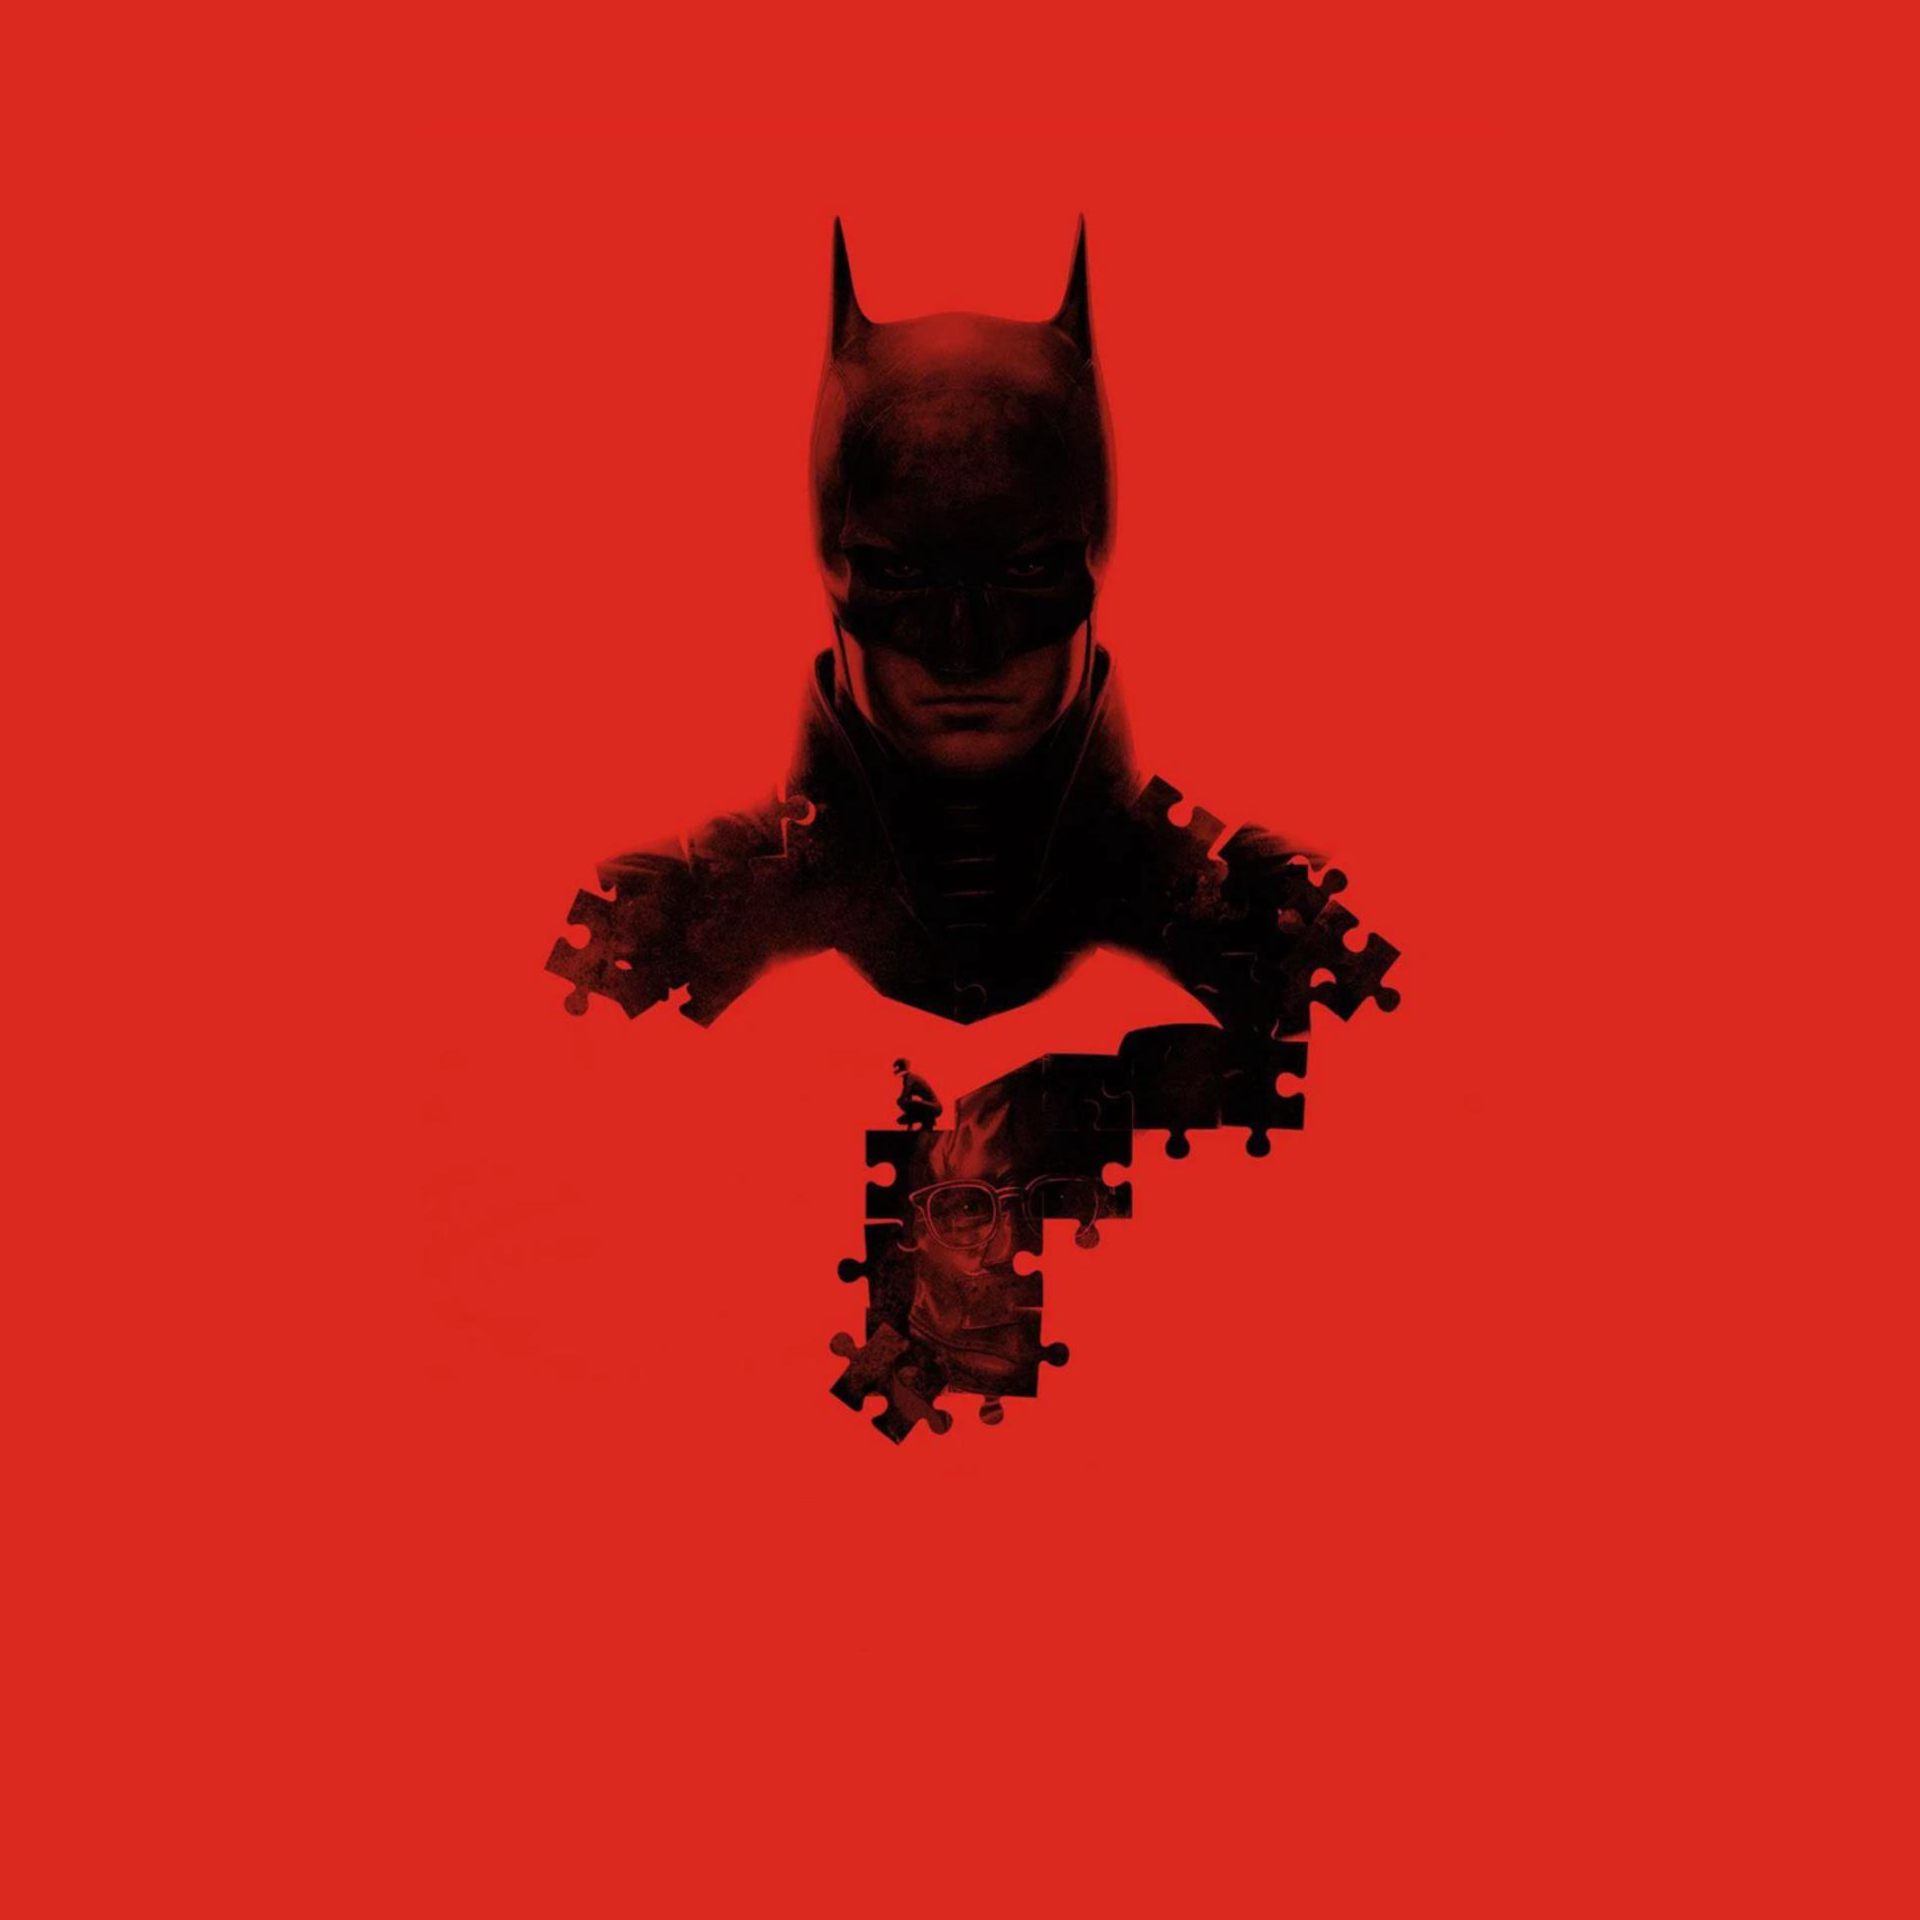 The Batman HD Wallpapers and 4K Backgrounds - Wallpapers Den